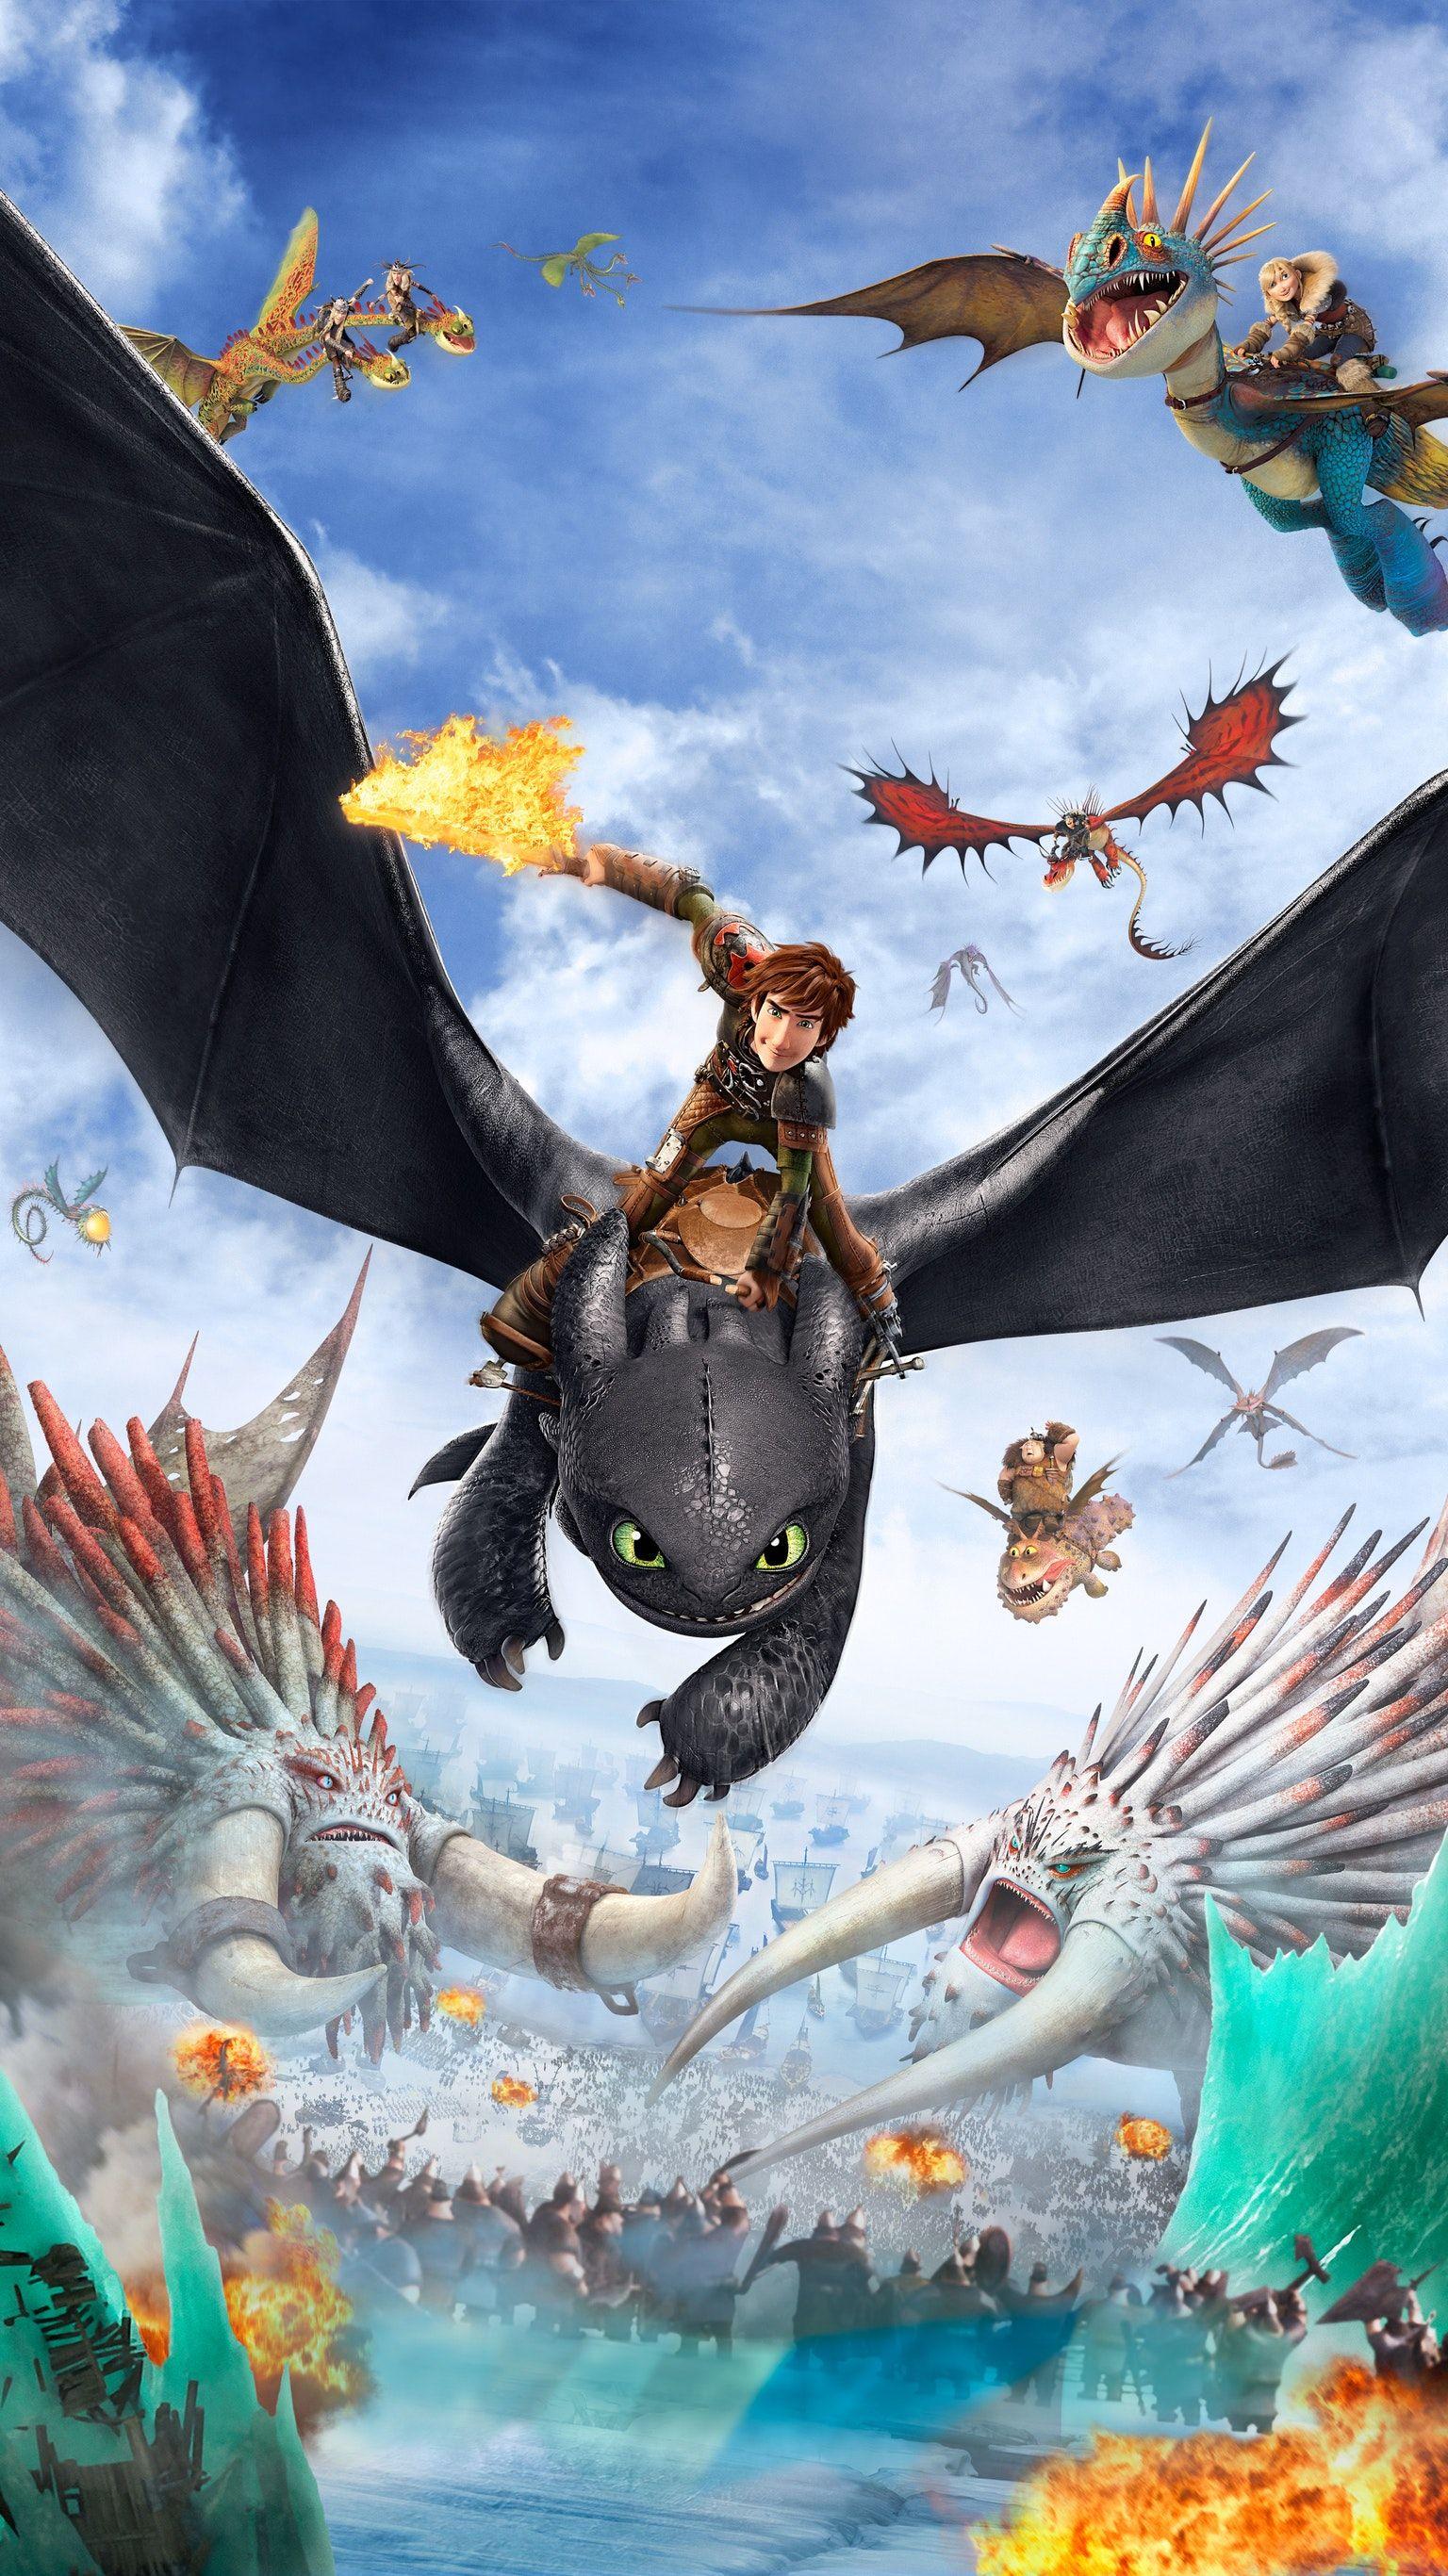 How to Train Your Dragon 2 (2014) Phone Wallpaper in 2019